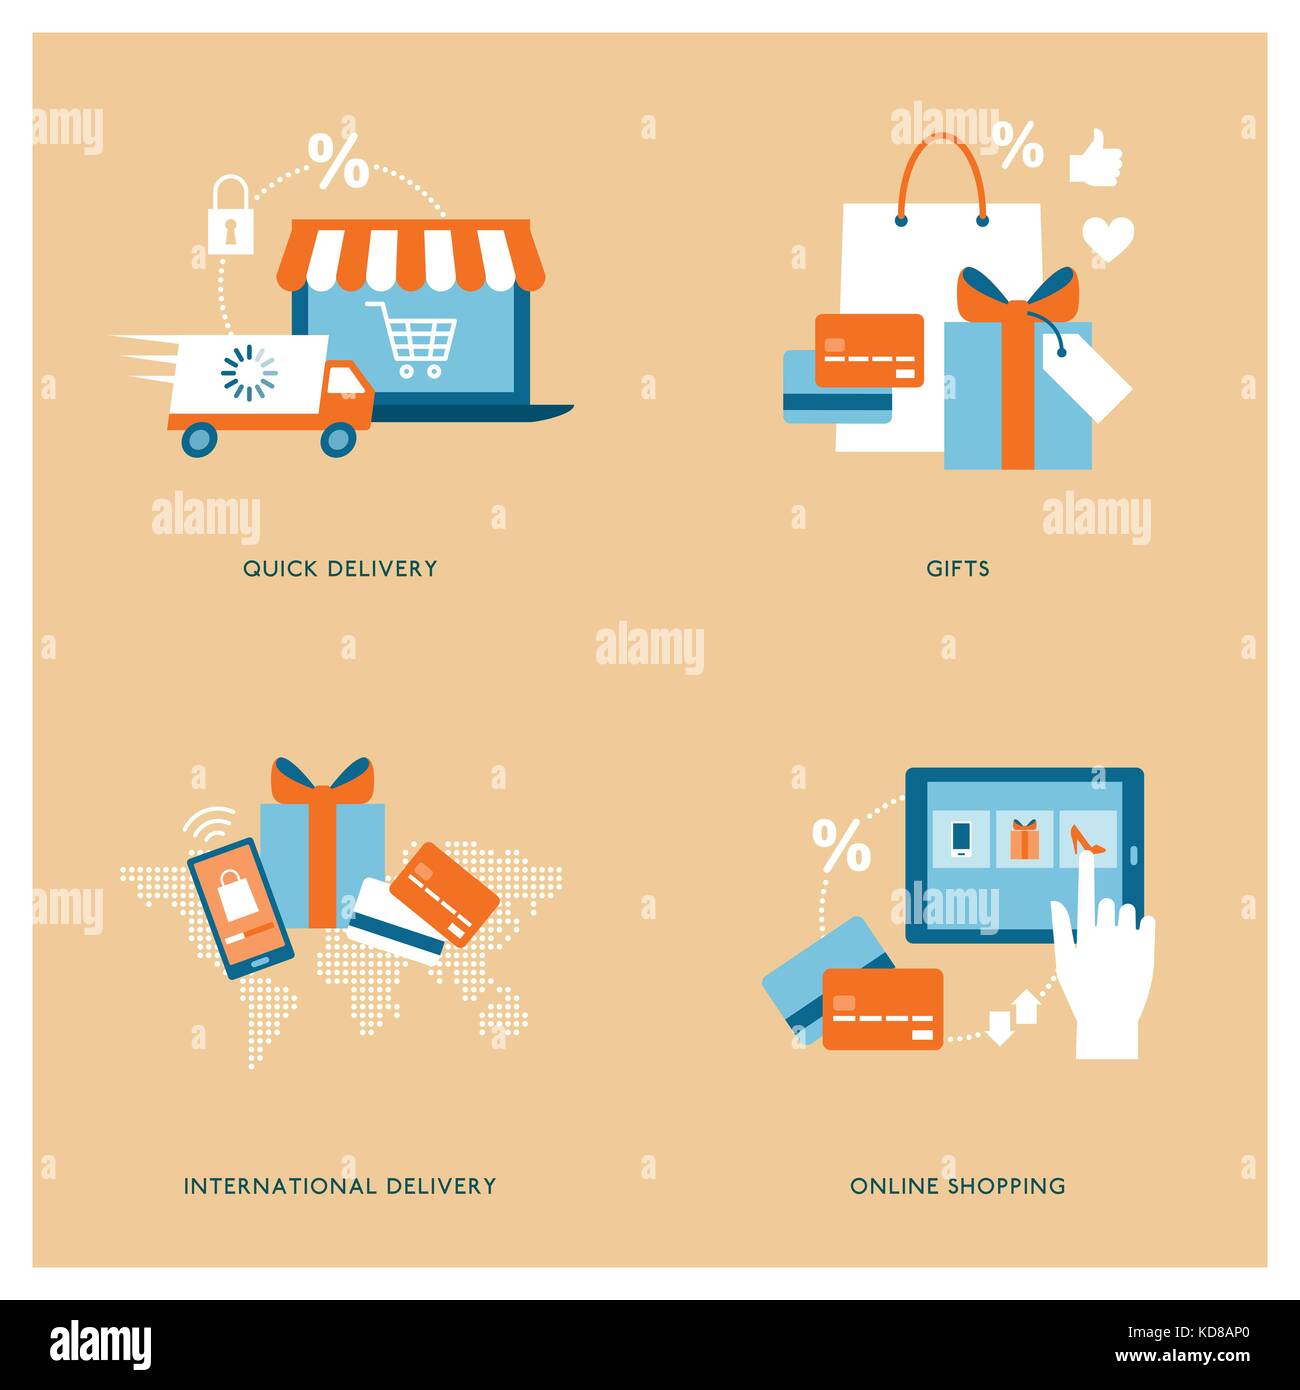 Online shopping, purchase and delivery concepts with icons Stock Vector